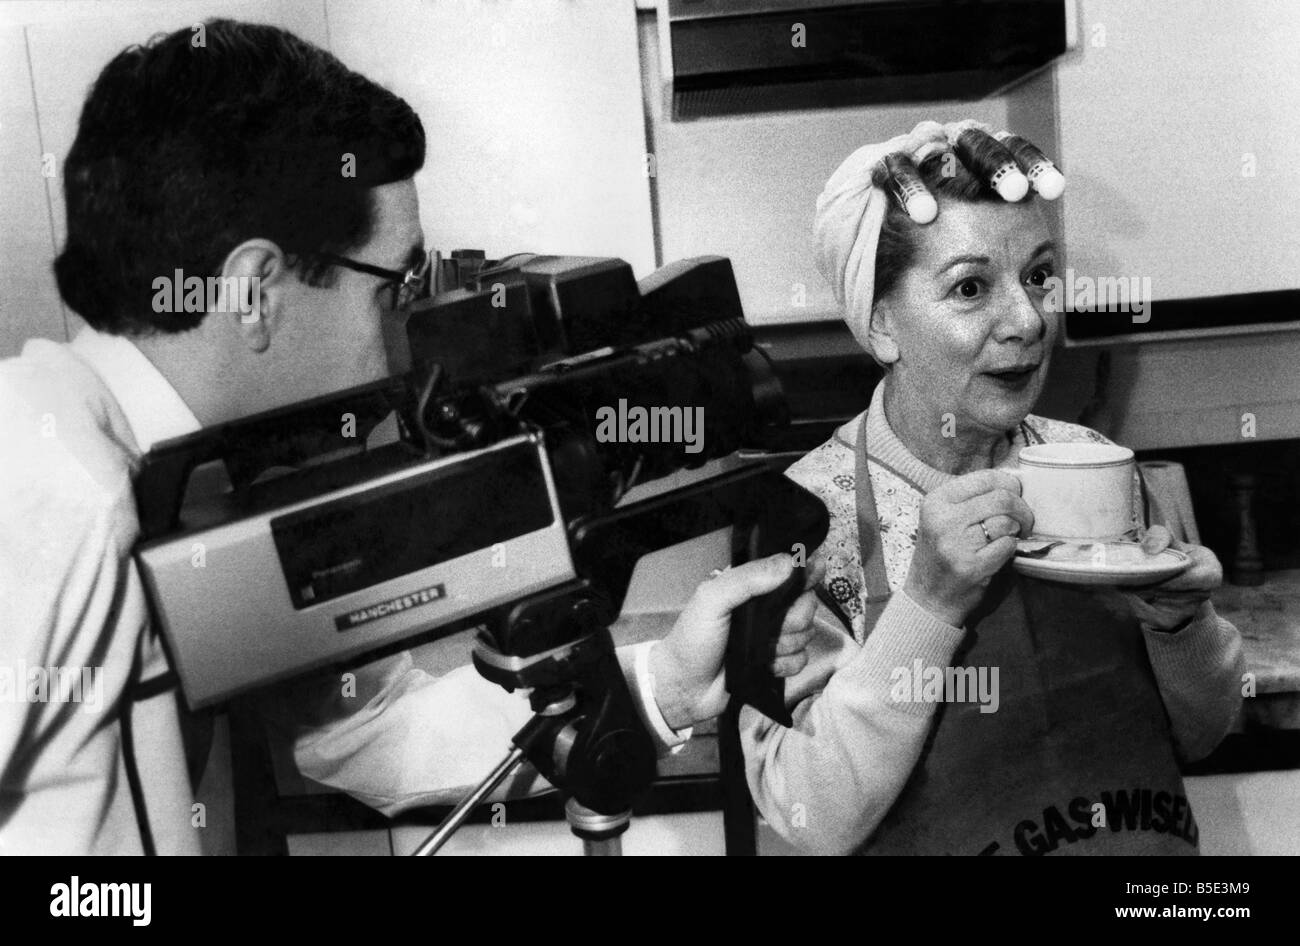 Former Coronation Street Star. Jean Alexander (Hilda Ogden in the street) was back before the cameras this week giving advice to pensioners on keeping warm, economic cooking and beating the burglars. Jean has made the film on behalf of British gas. {FL} January 1988 P002938 Stock Photo